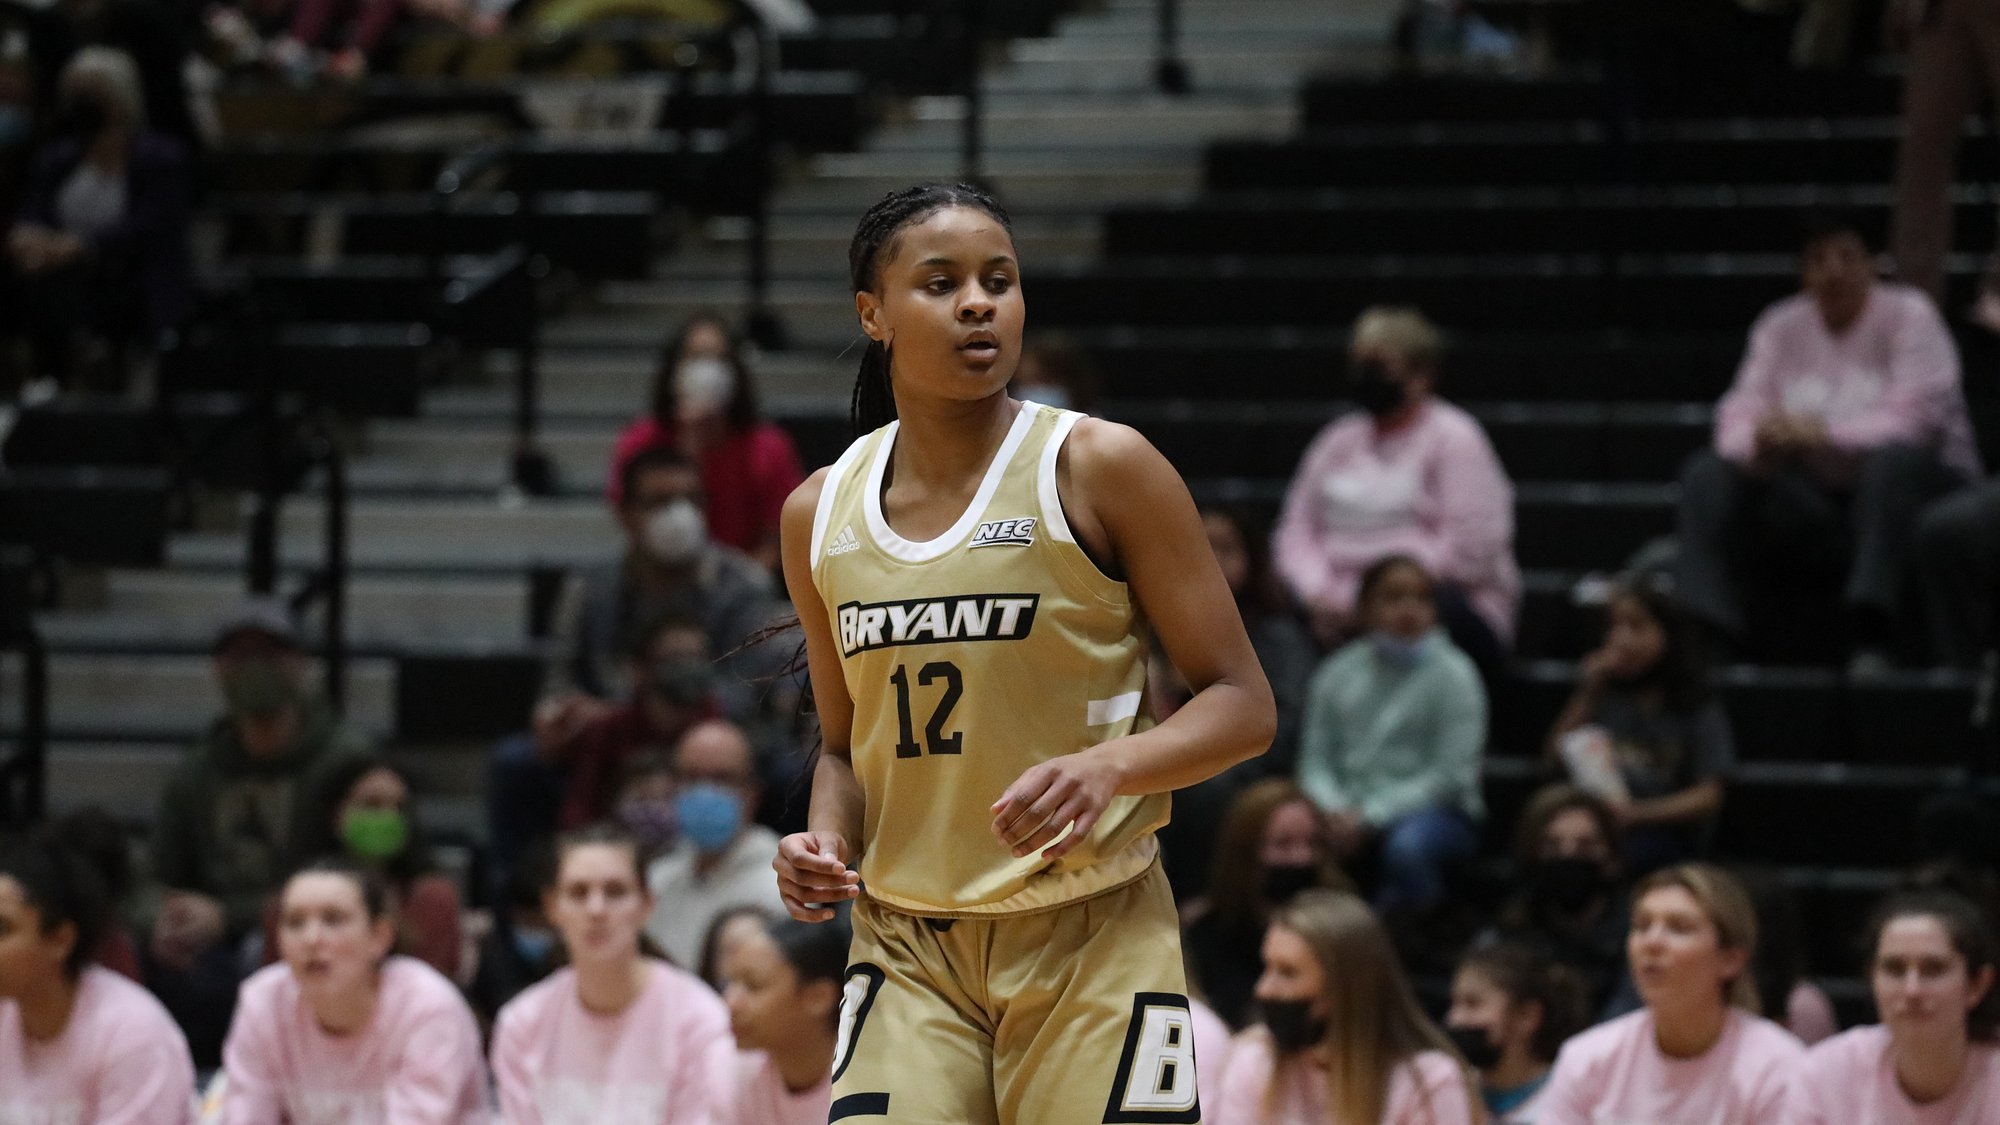 Jallow and Bjelko score 12 in loss to FDU